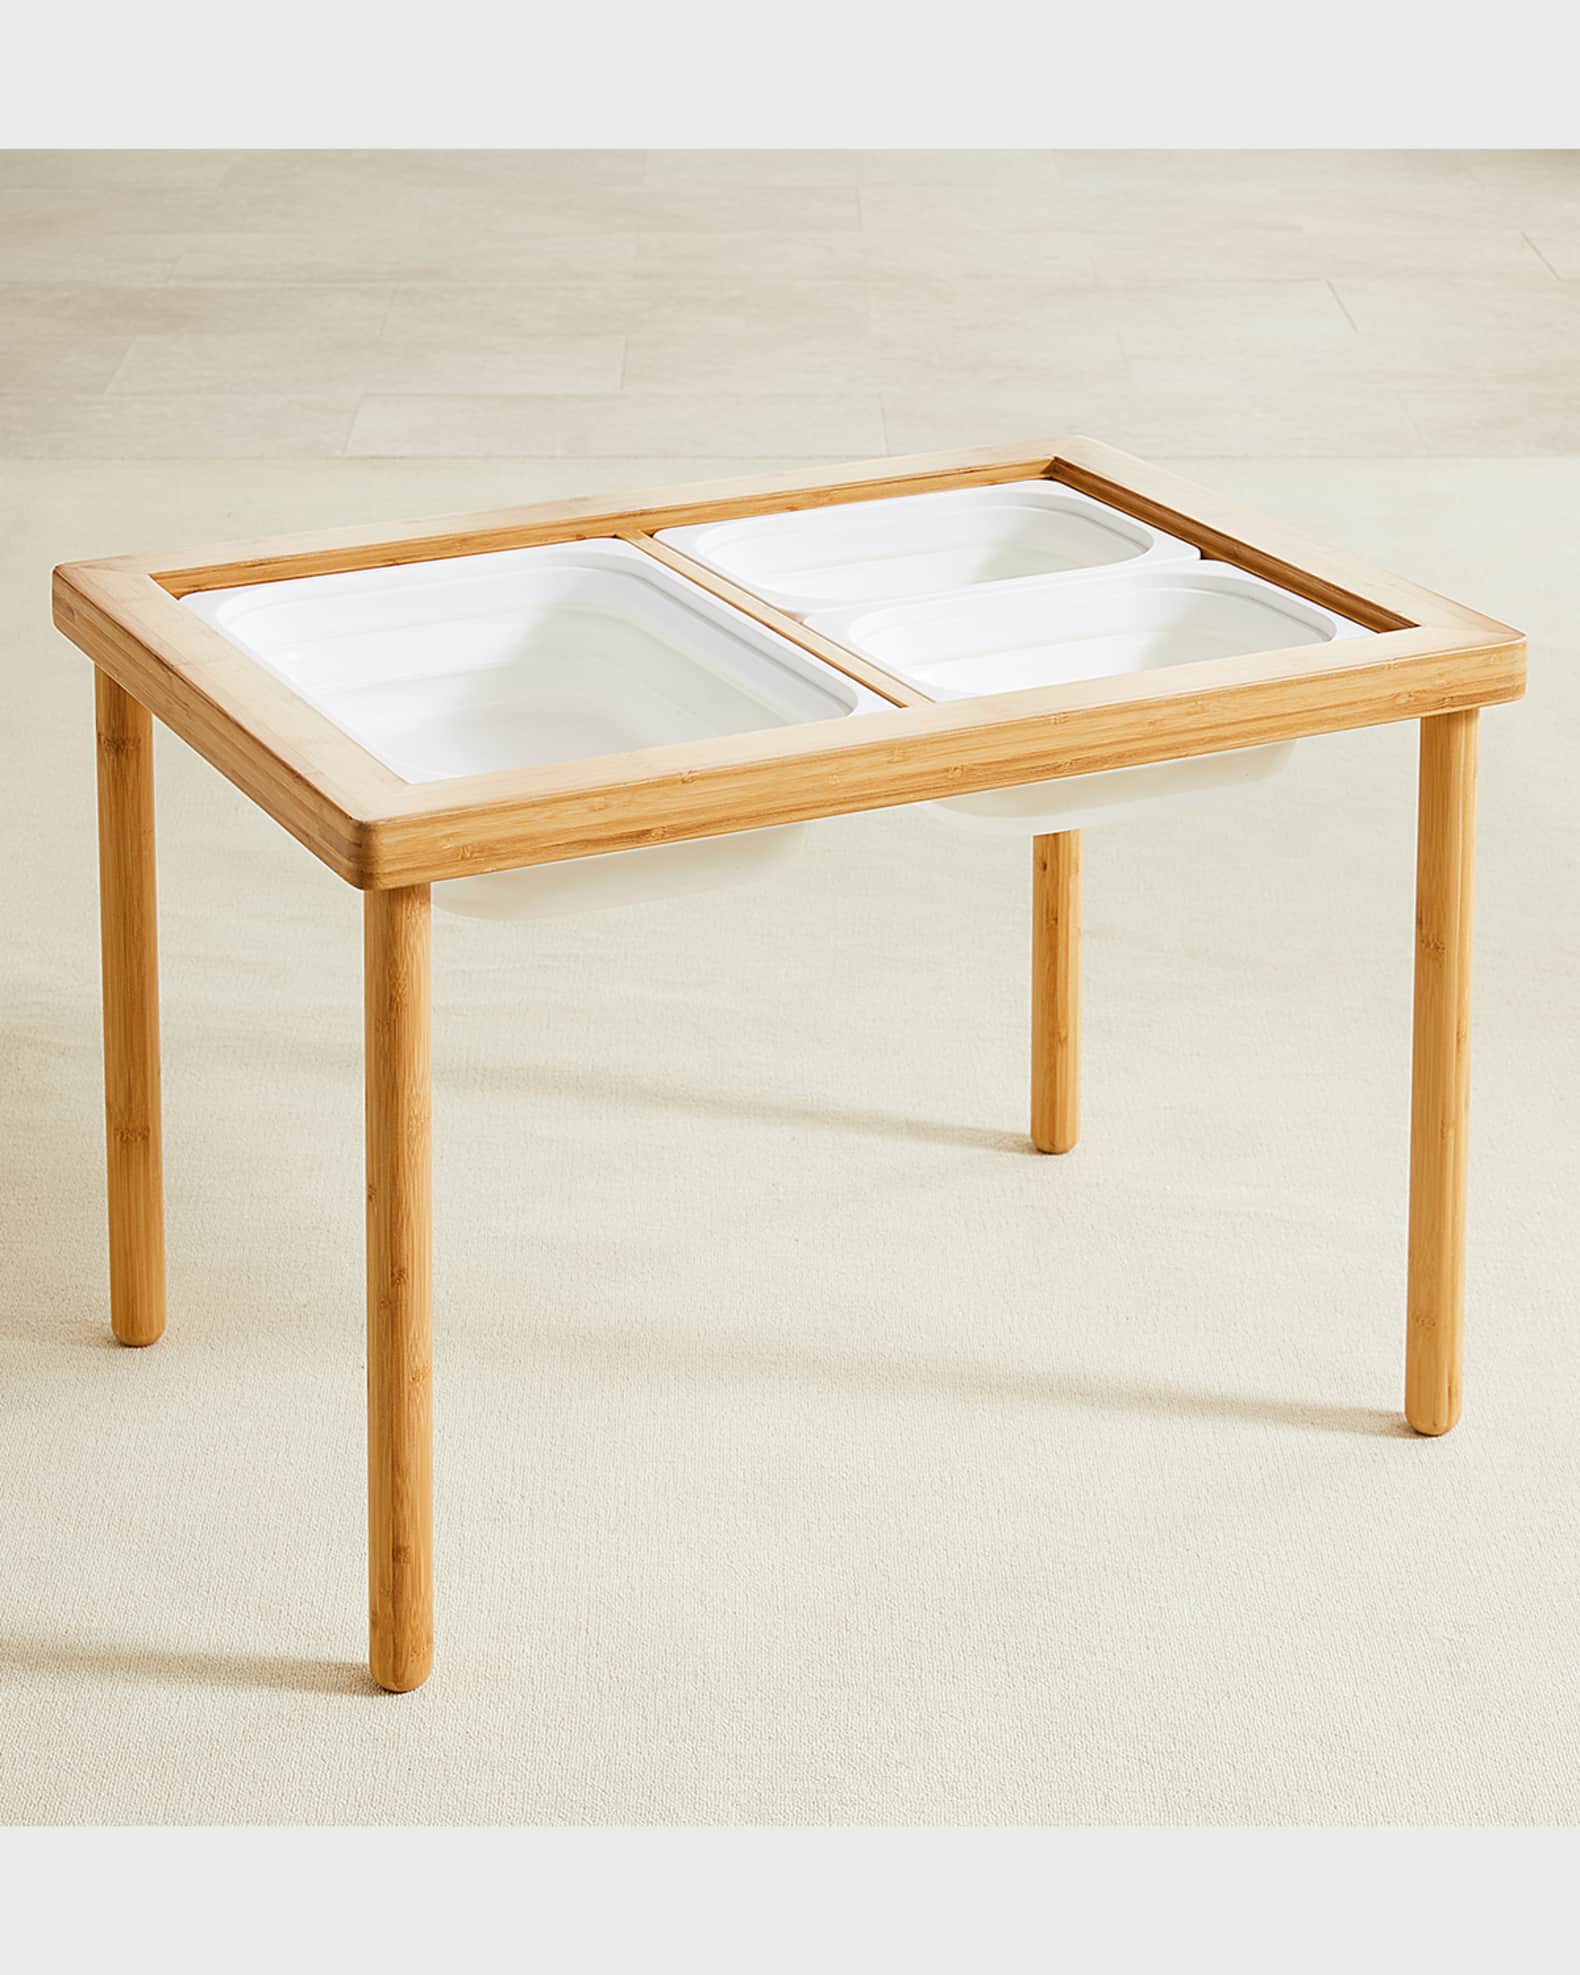 Land, Sand And Water Table | Neiman Marcus